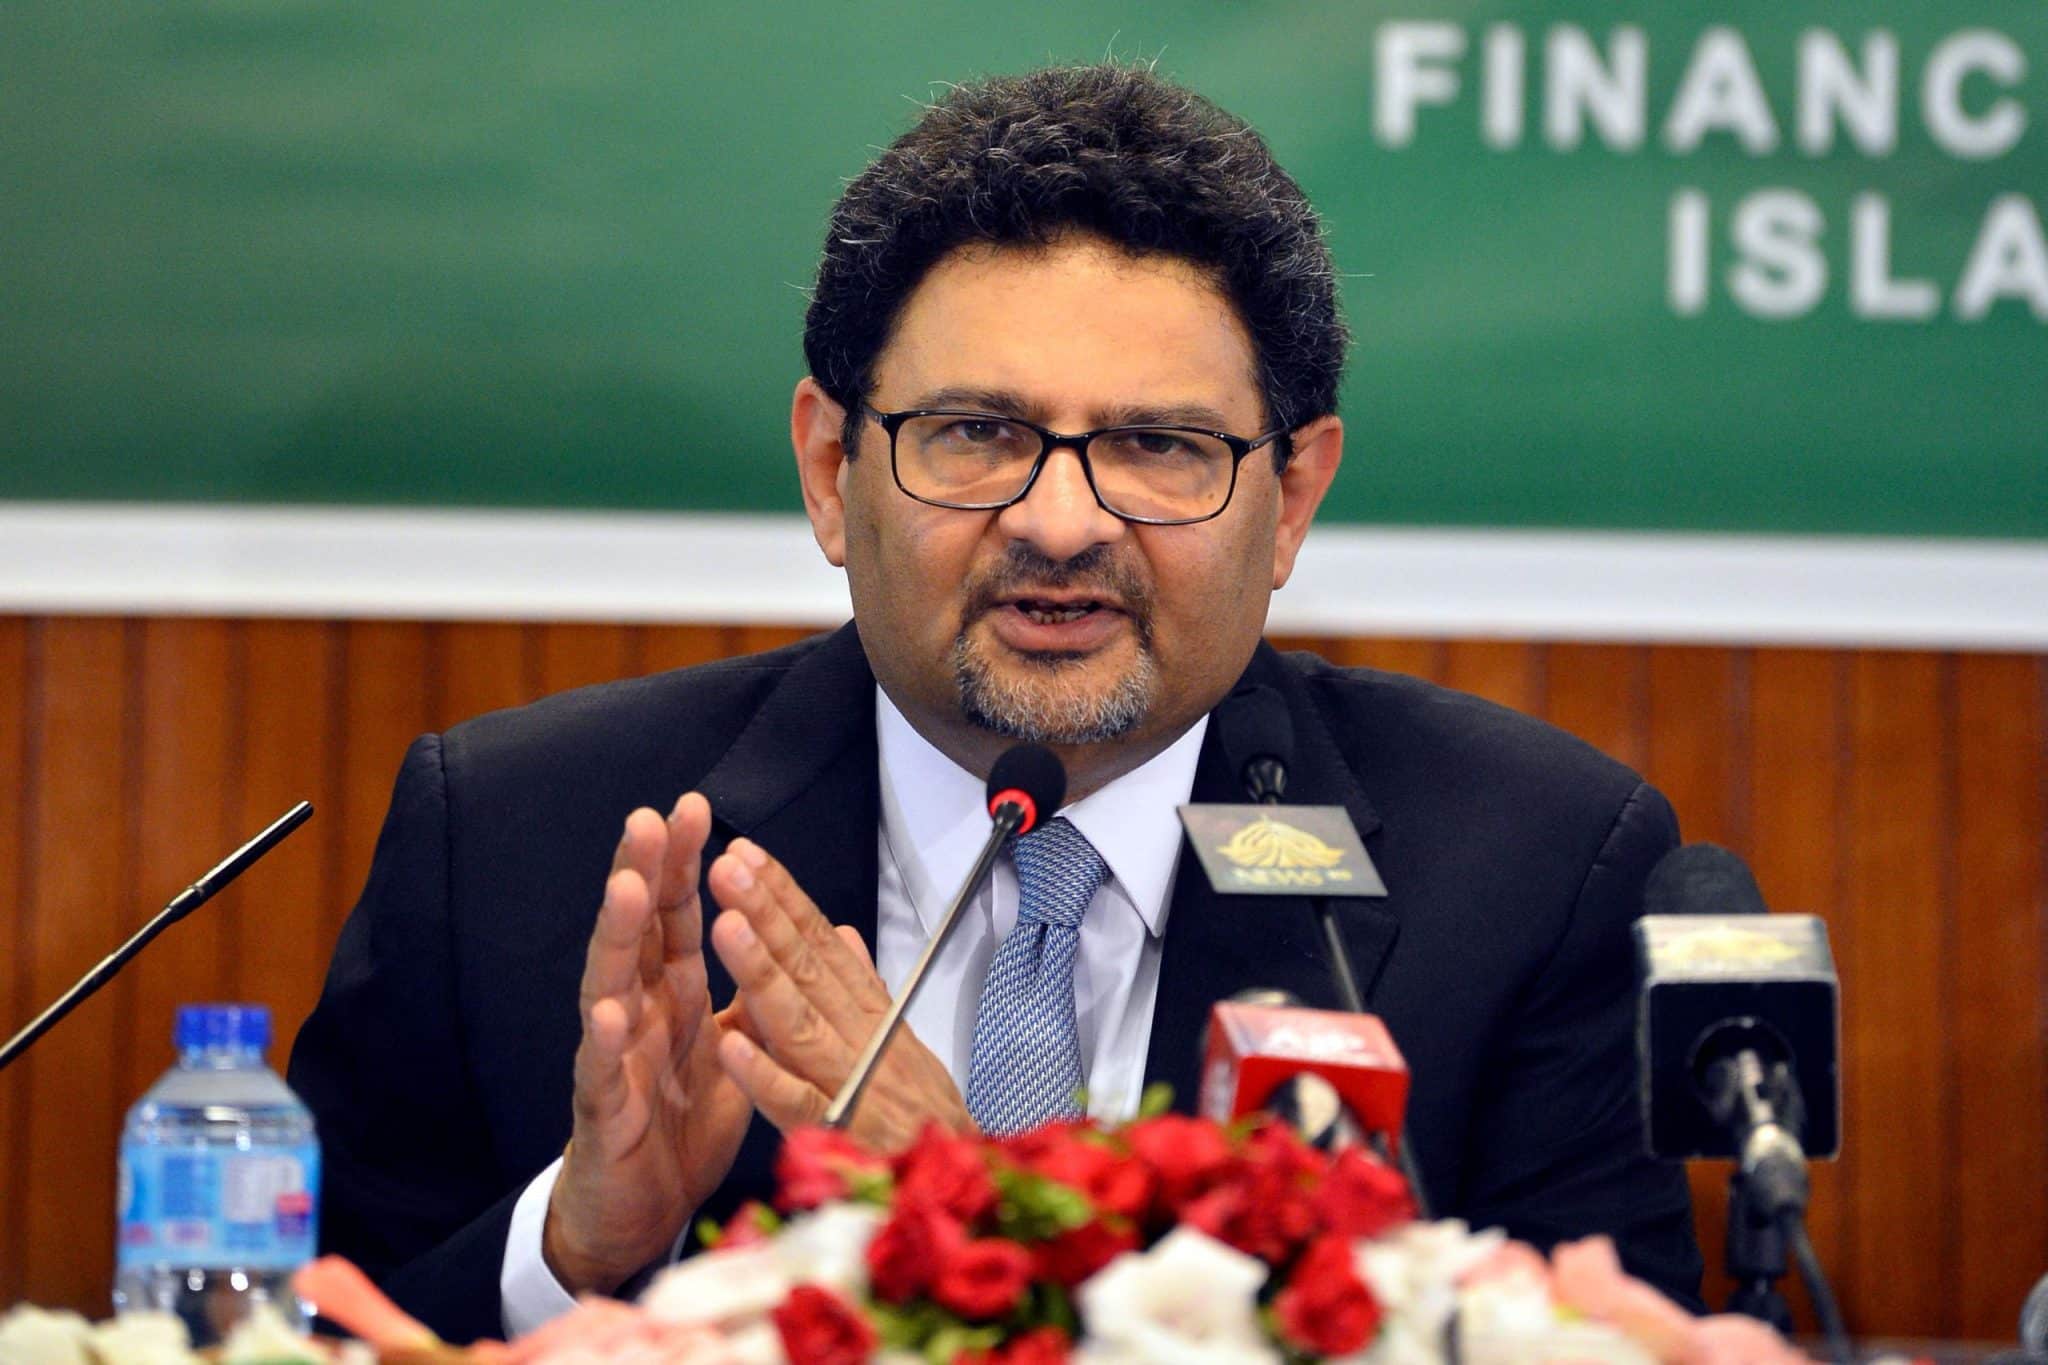 'Govt has 13 months but I may not have that much time': Miftah Ismail